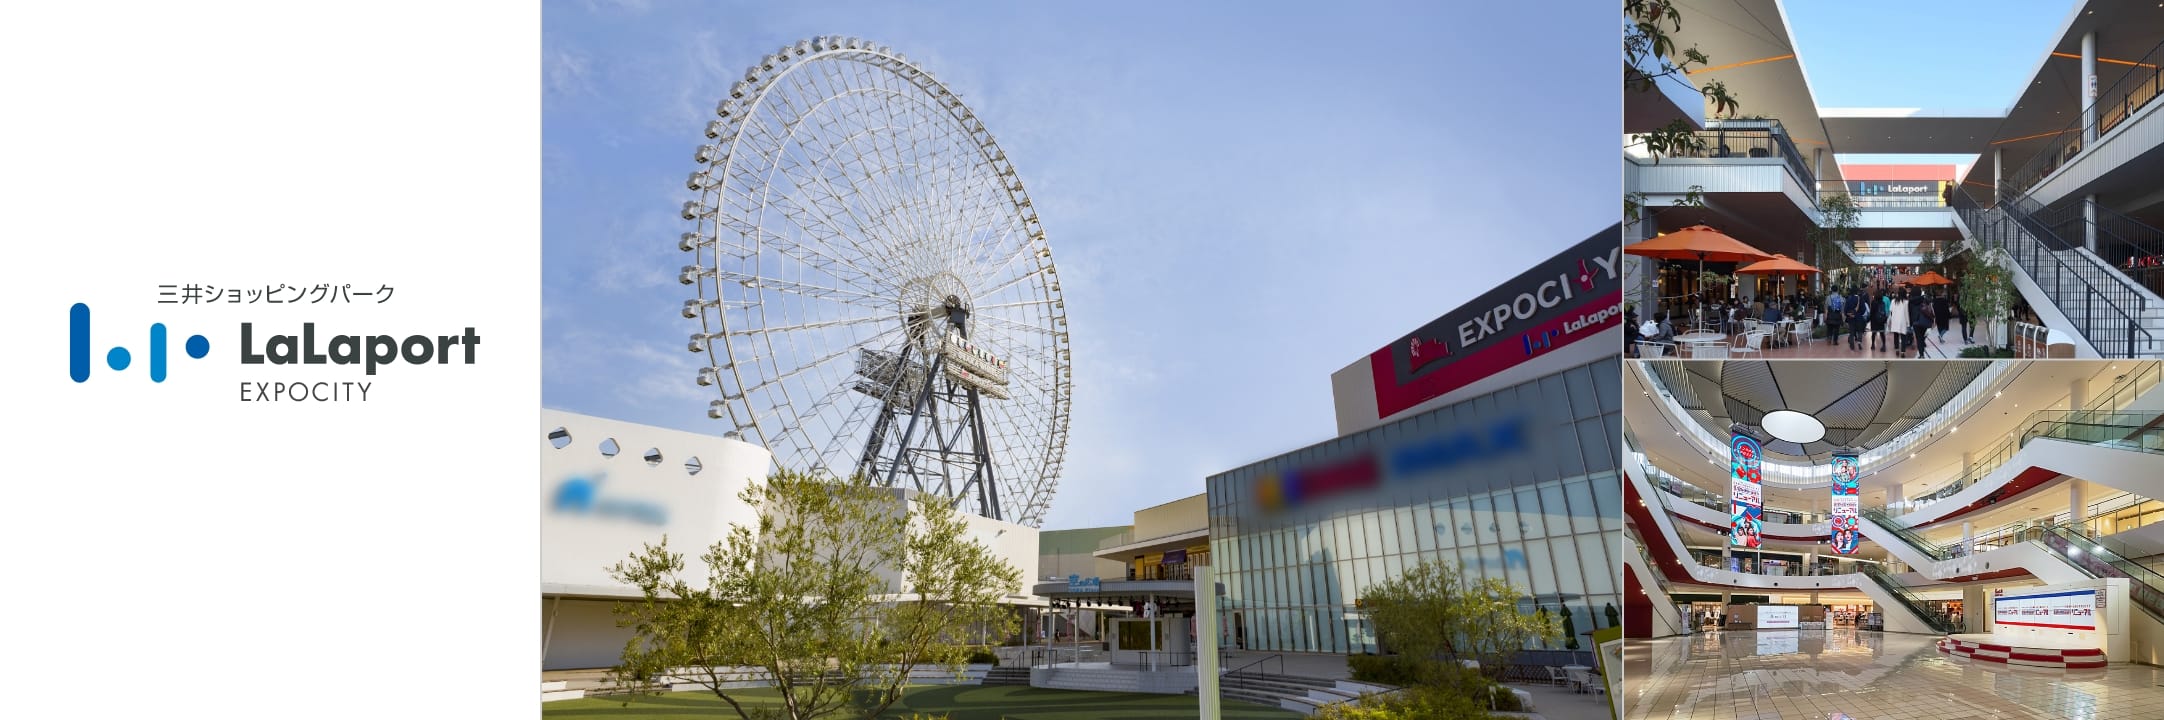 Mitsui Shopping Park LaLaport EXPOCITY